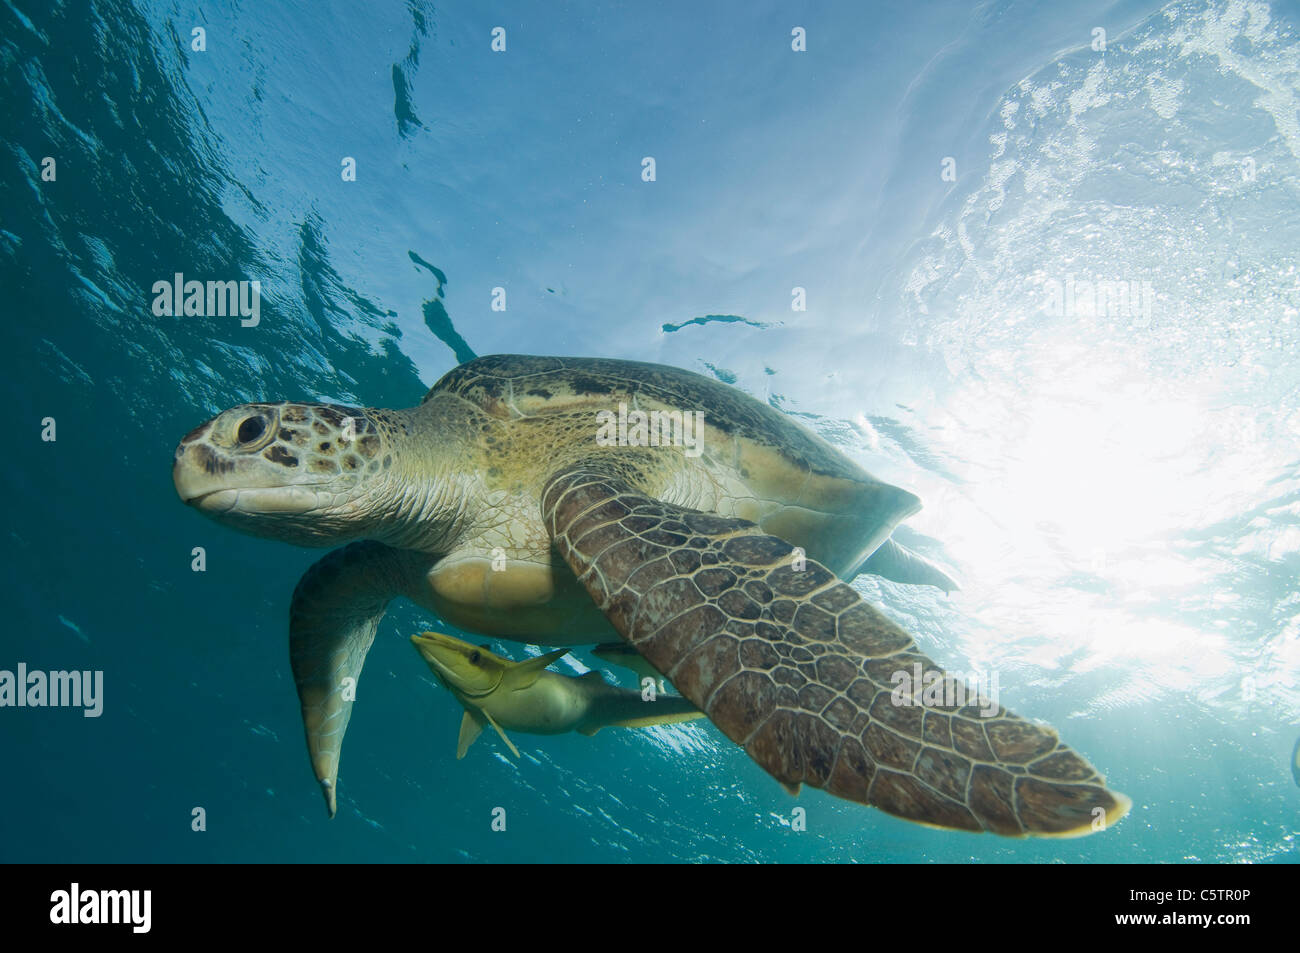 Egypt, Red Sea, Green sea turtle (Chelonia mydas) and pilot fish (Naucrates ductor) Stock Photo